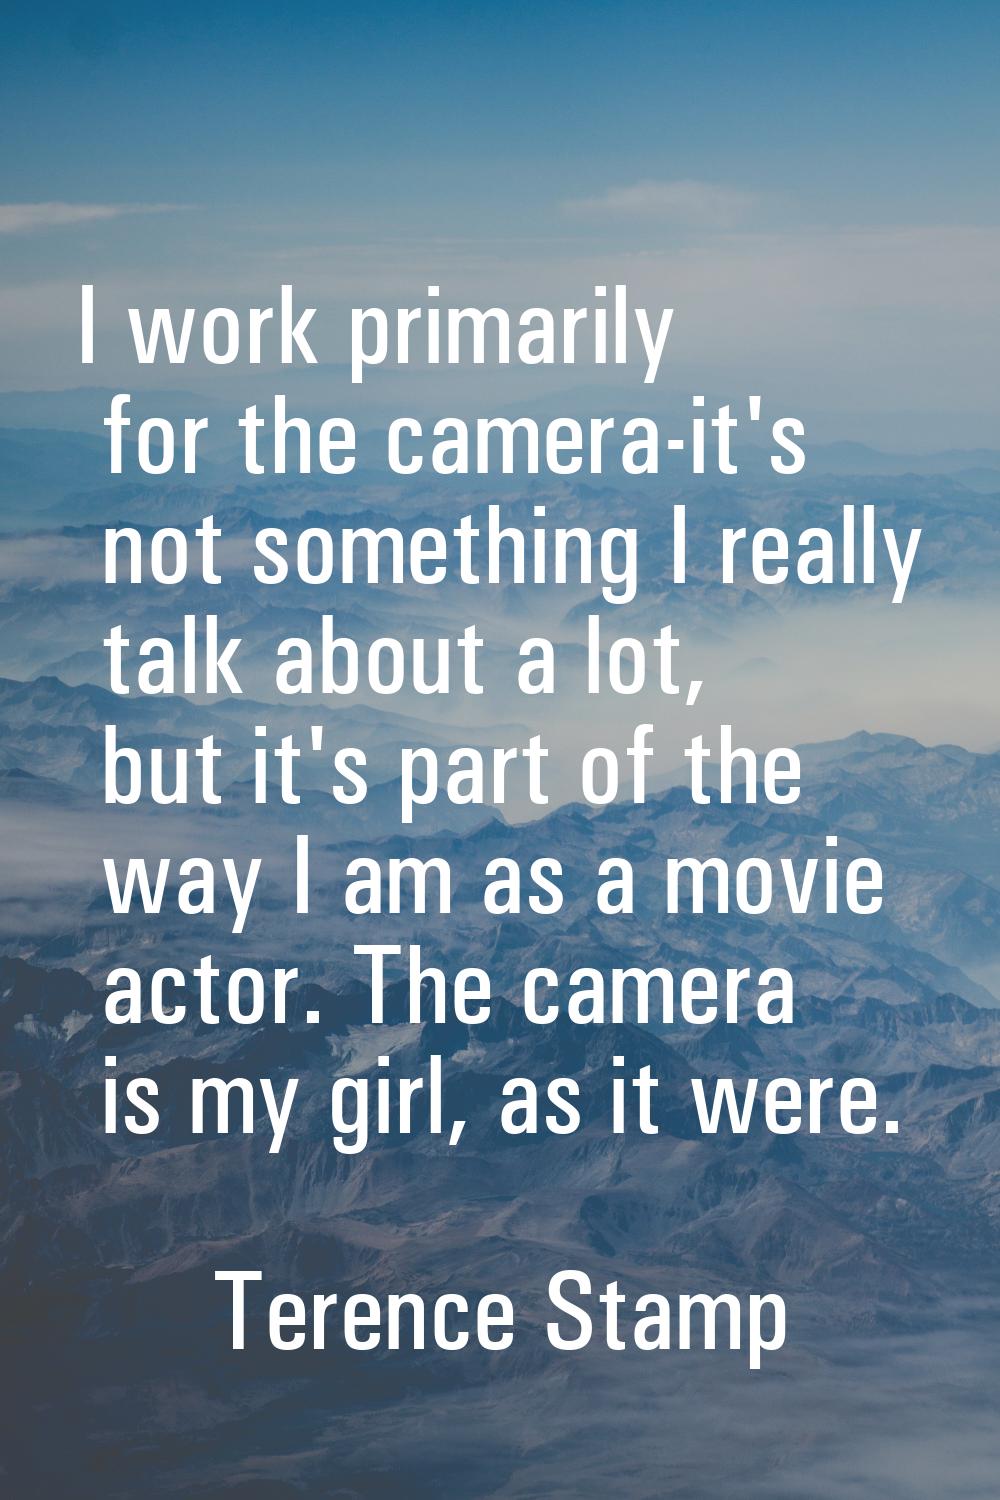 I work primarily for the camera-it's not something I really talk about a lot, but it's part of the 